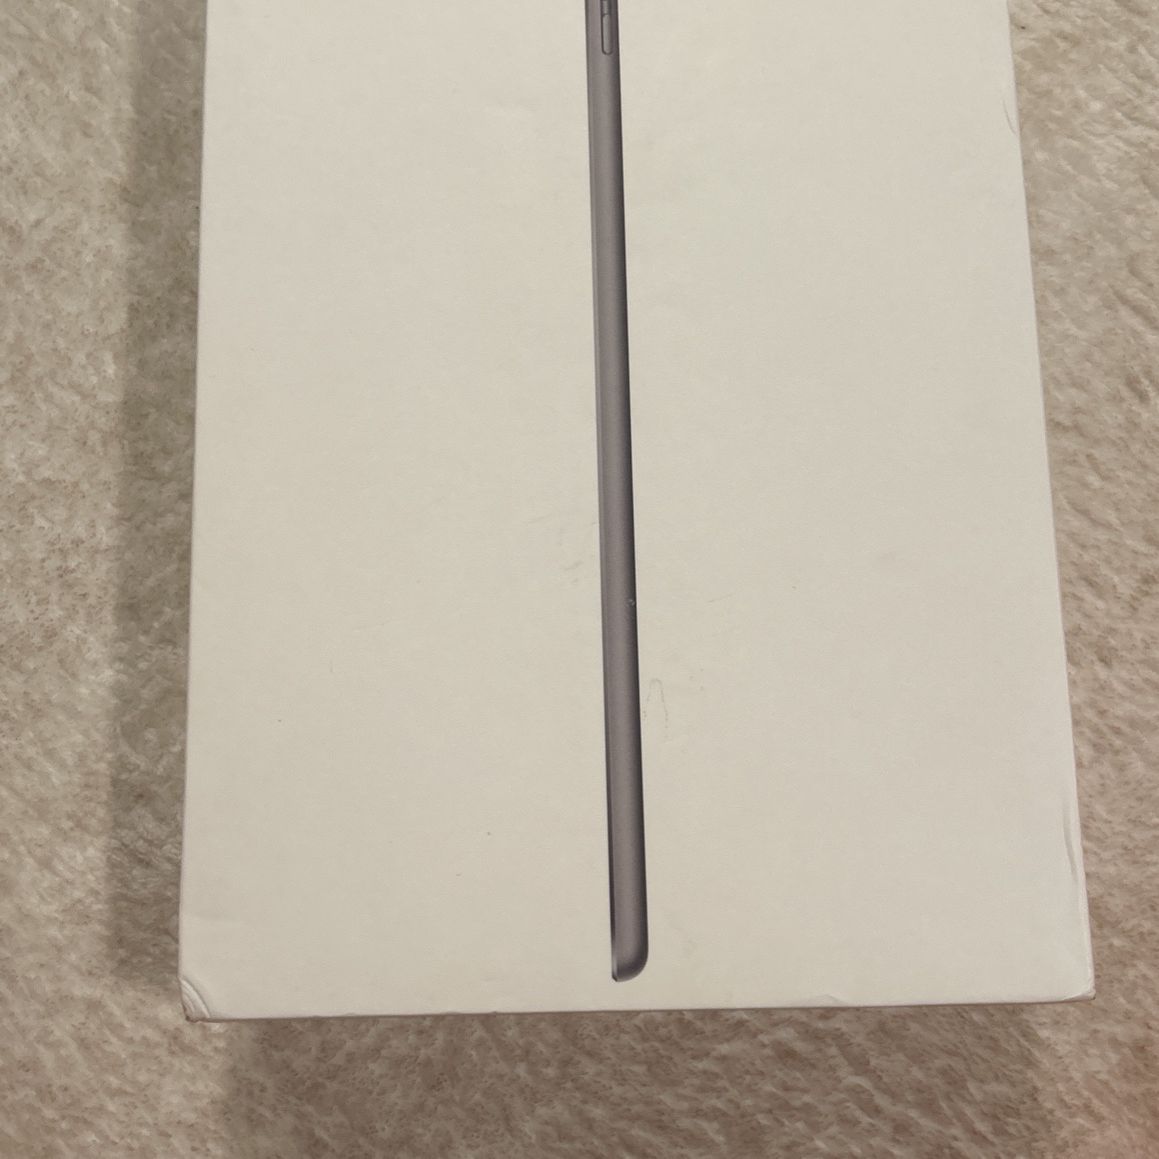 iPAD 64 GB 9th Generation PRICED TO SELL